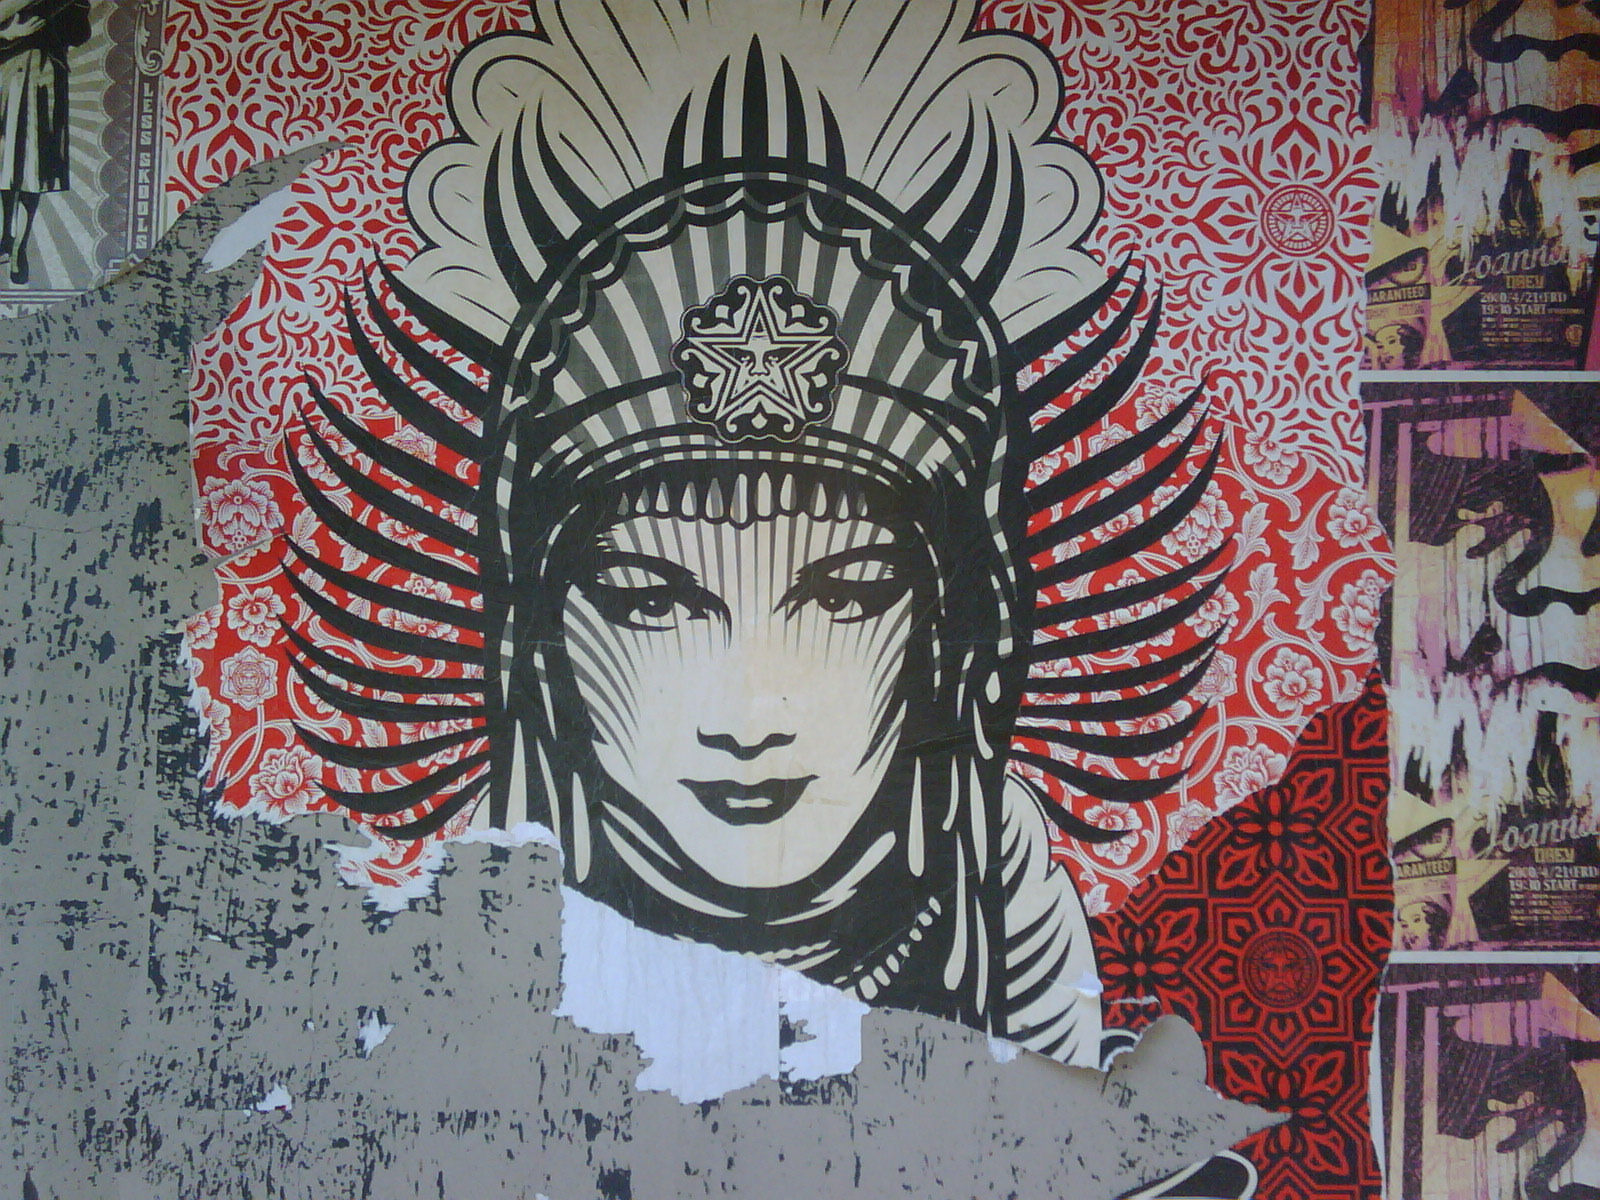 SHEPARD FAIREY MANCHESTER ENGLAND - Obey Giant